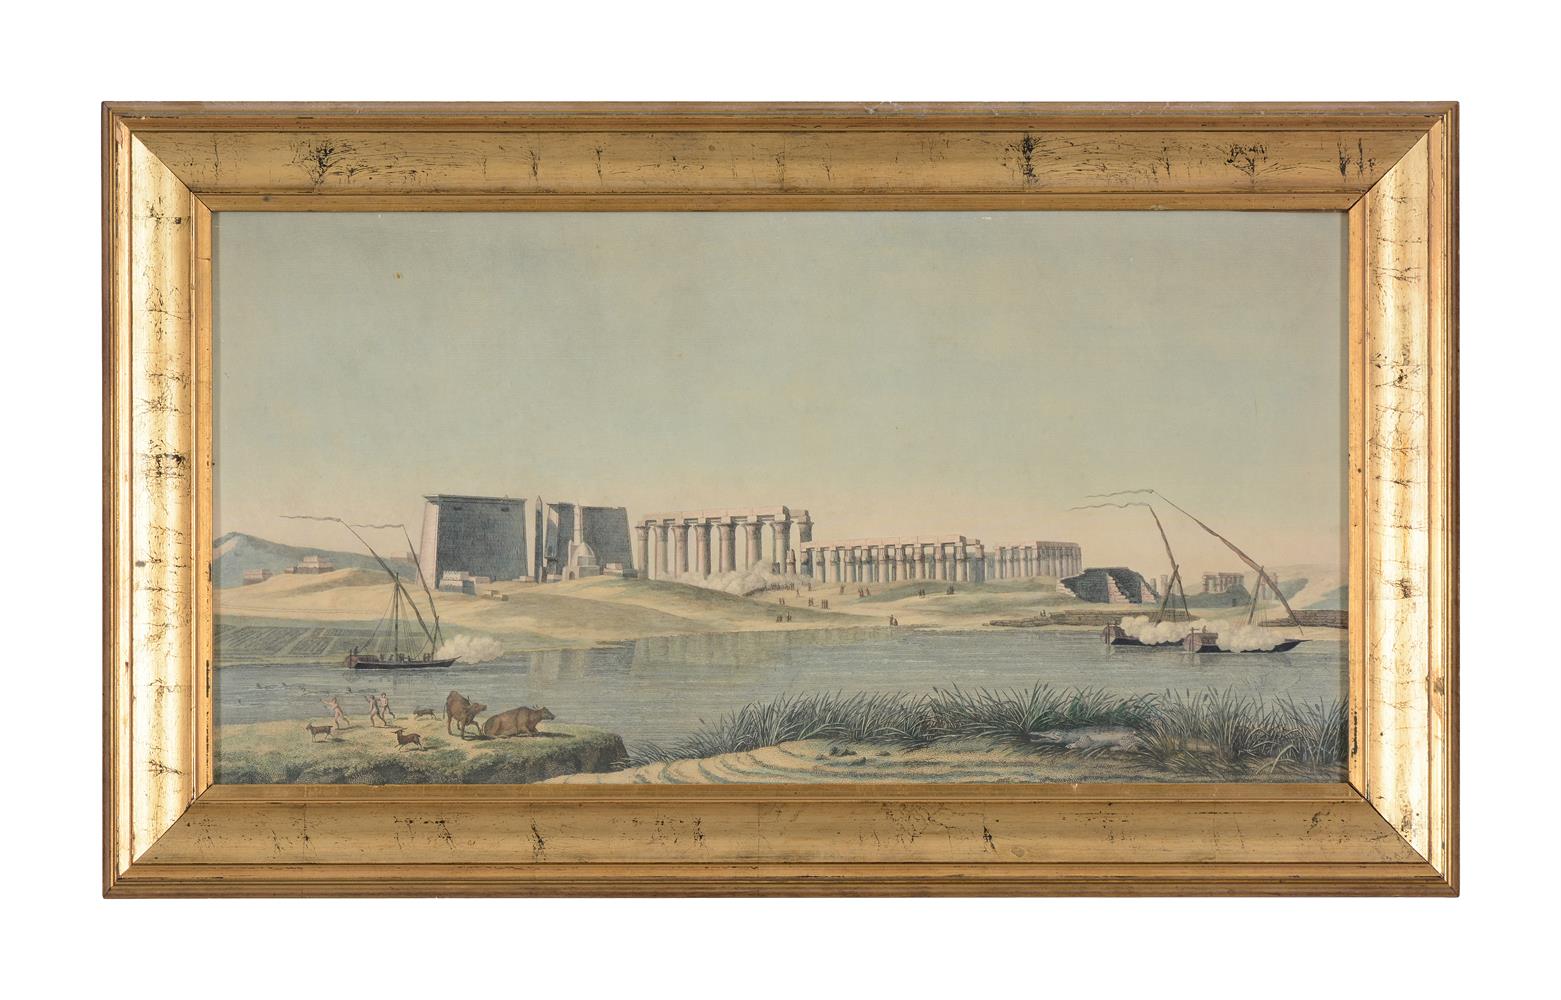 SIX HAND-COLOURED ENGRAVINGS OF EGYPT (LUXOR, KARNAK, DENDERA), EARLY 19TH CENTURY - Image 4 of 13